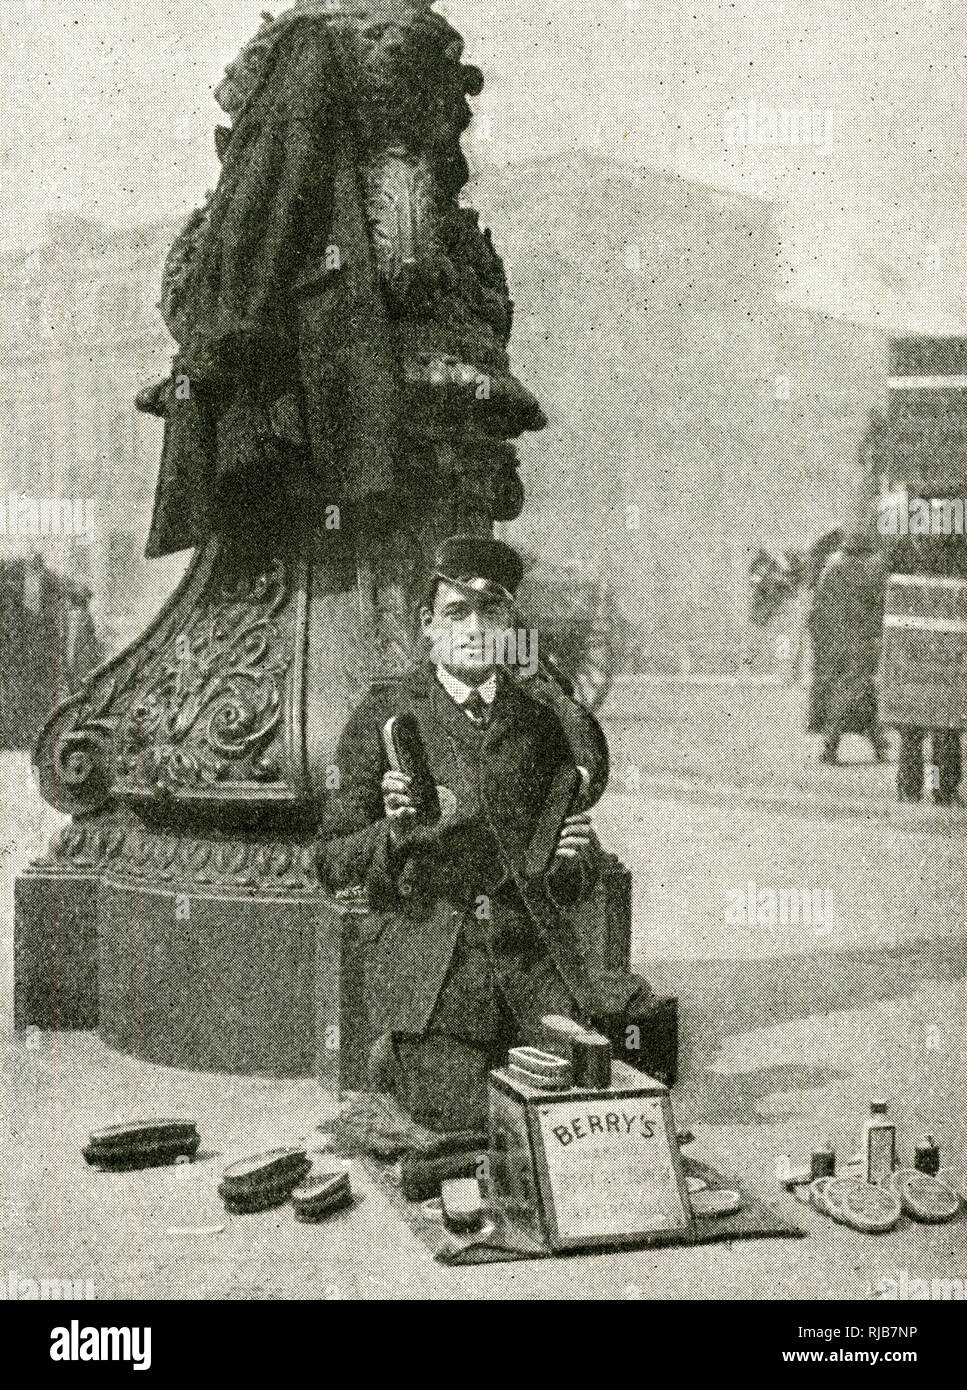 Shoeshine man in a Central London street Stock Photo